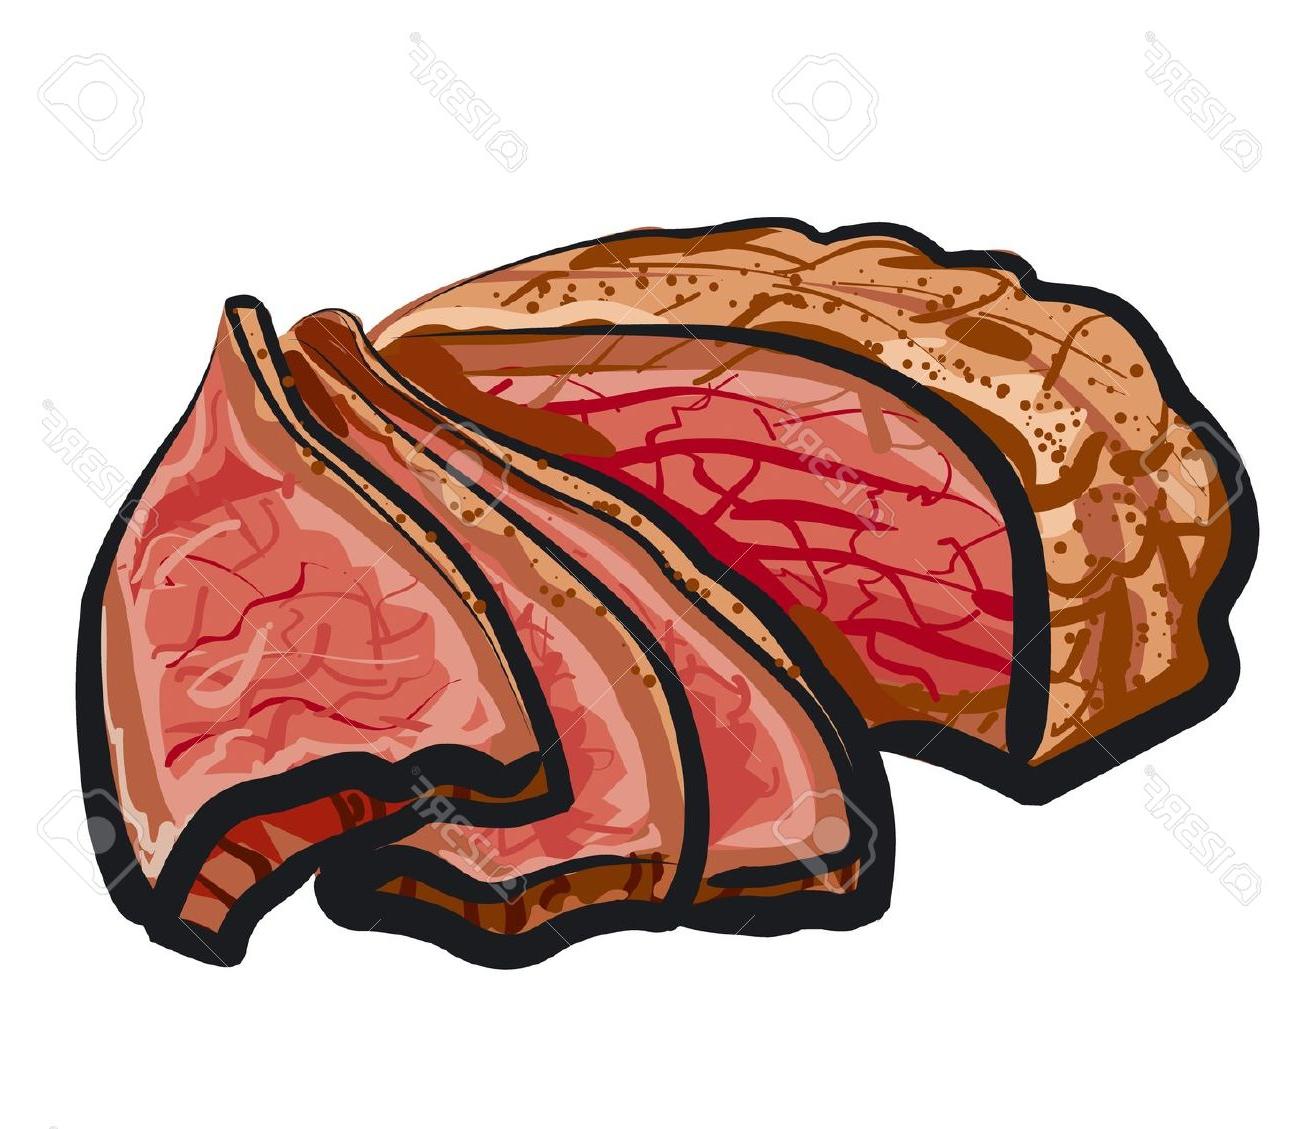 Beef clipart.  collection of high